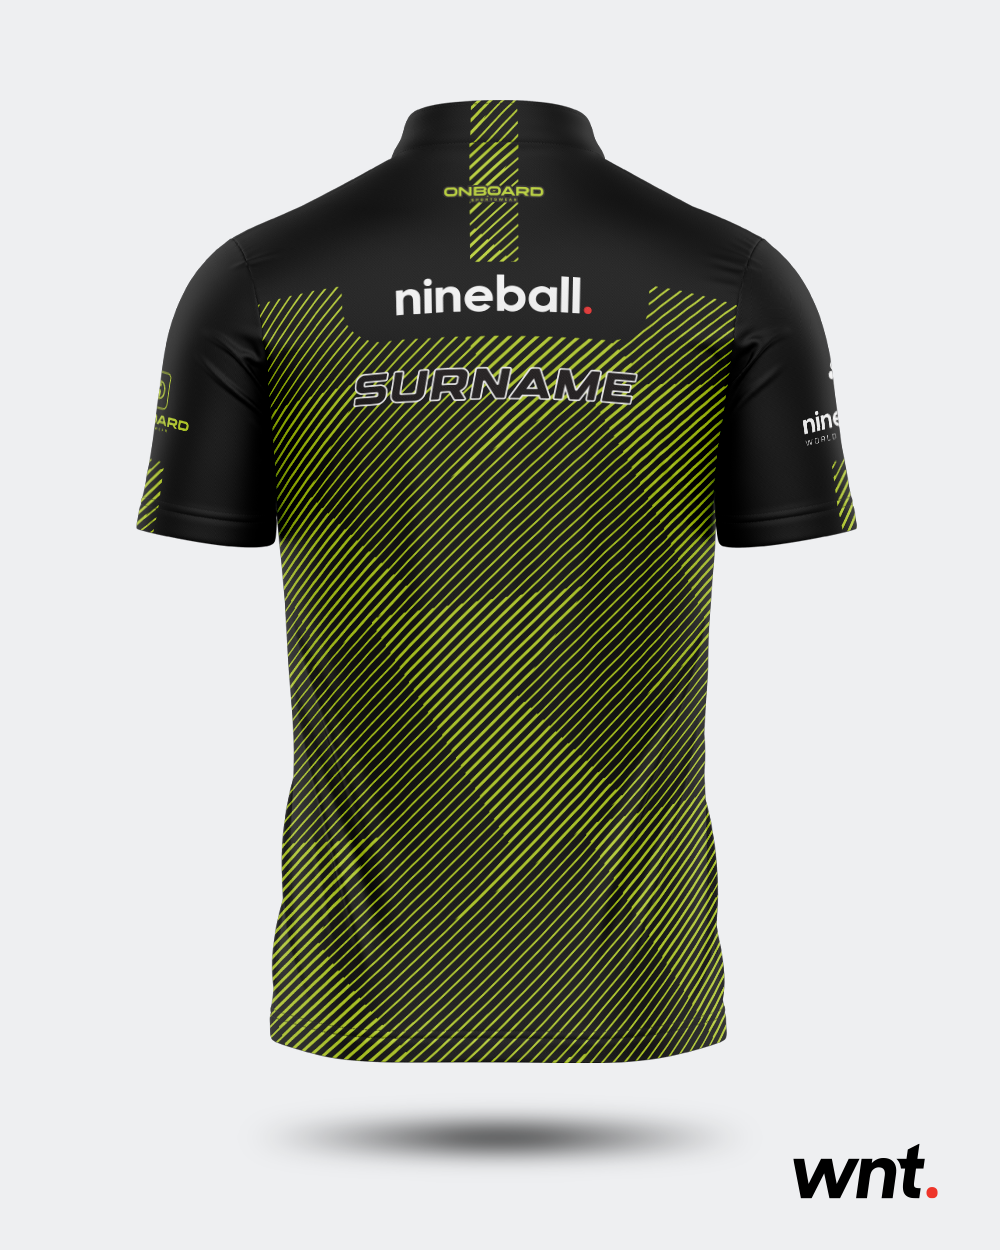 Essential Nineball Jersey - Lime